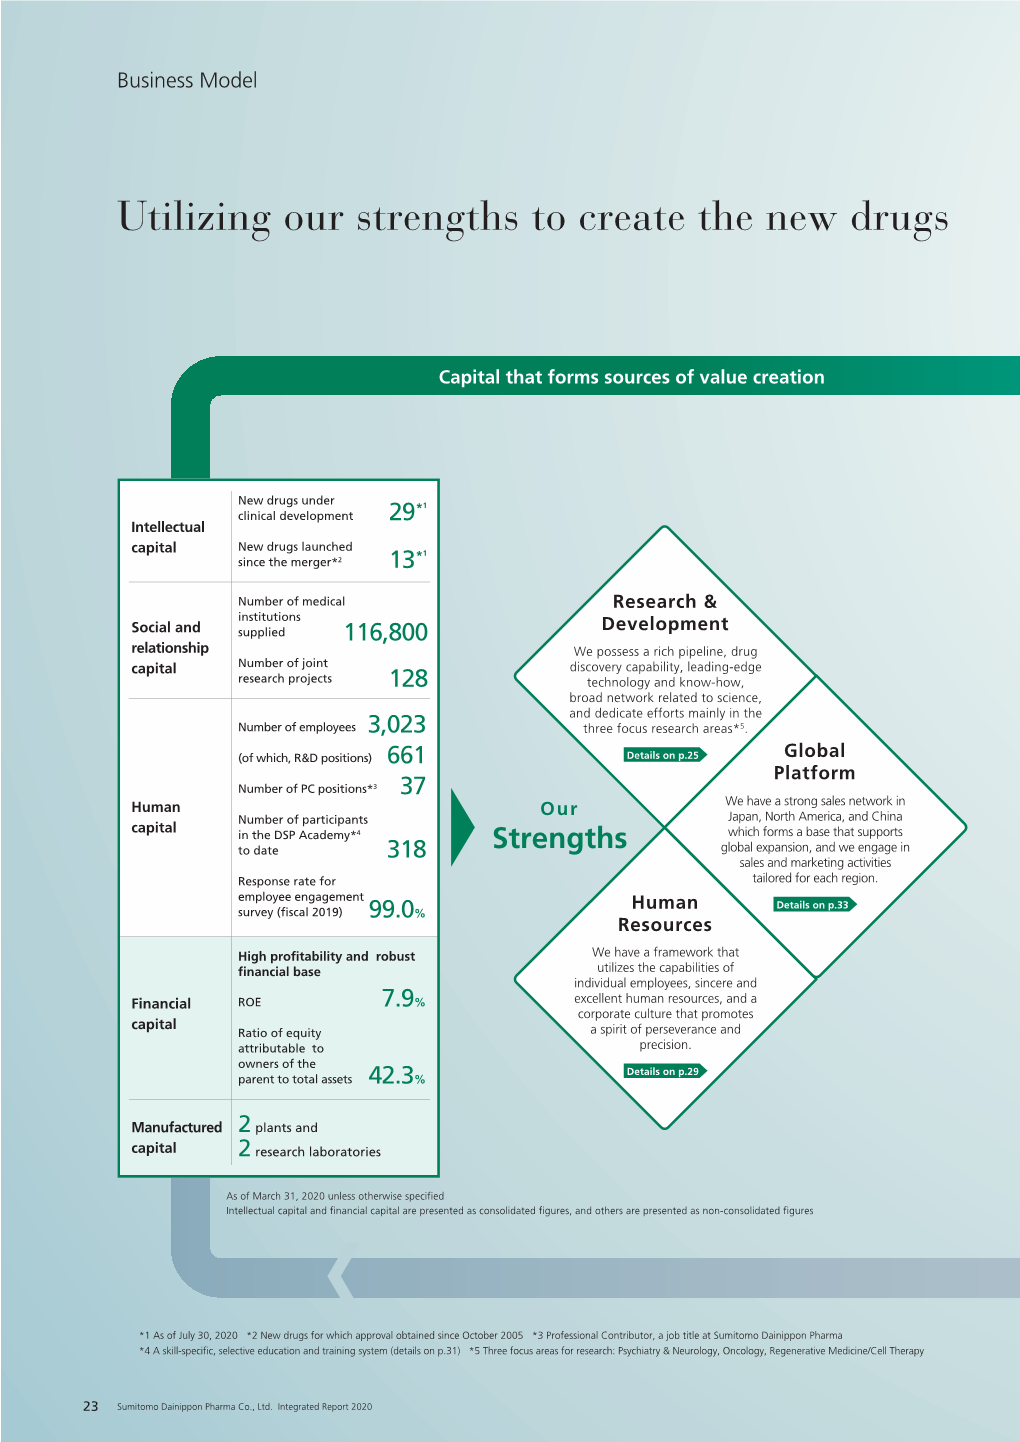 Utilizing Our Strengths to Create the New Drugs